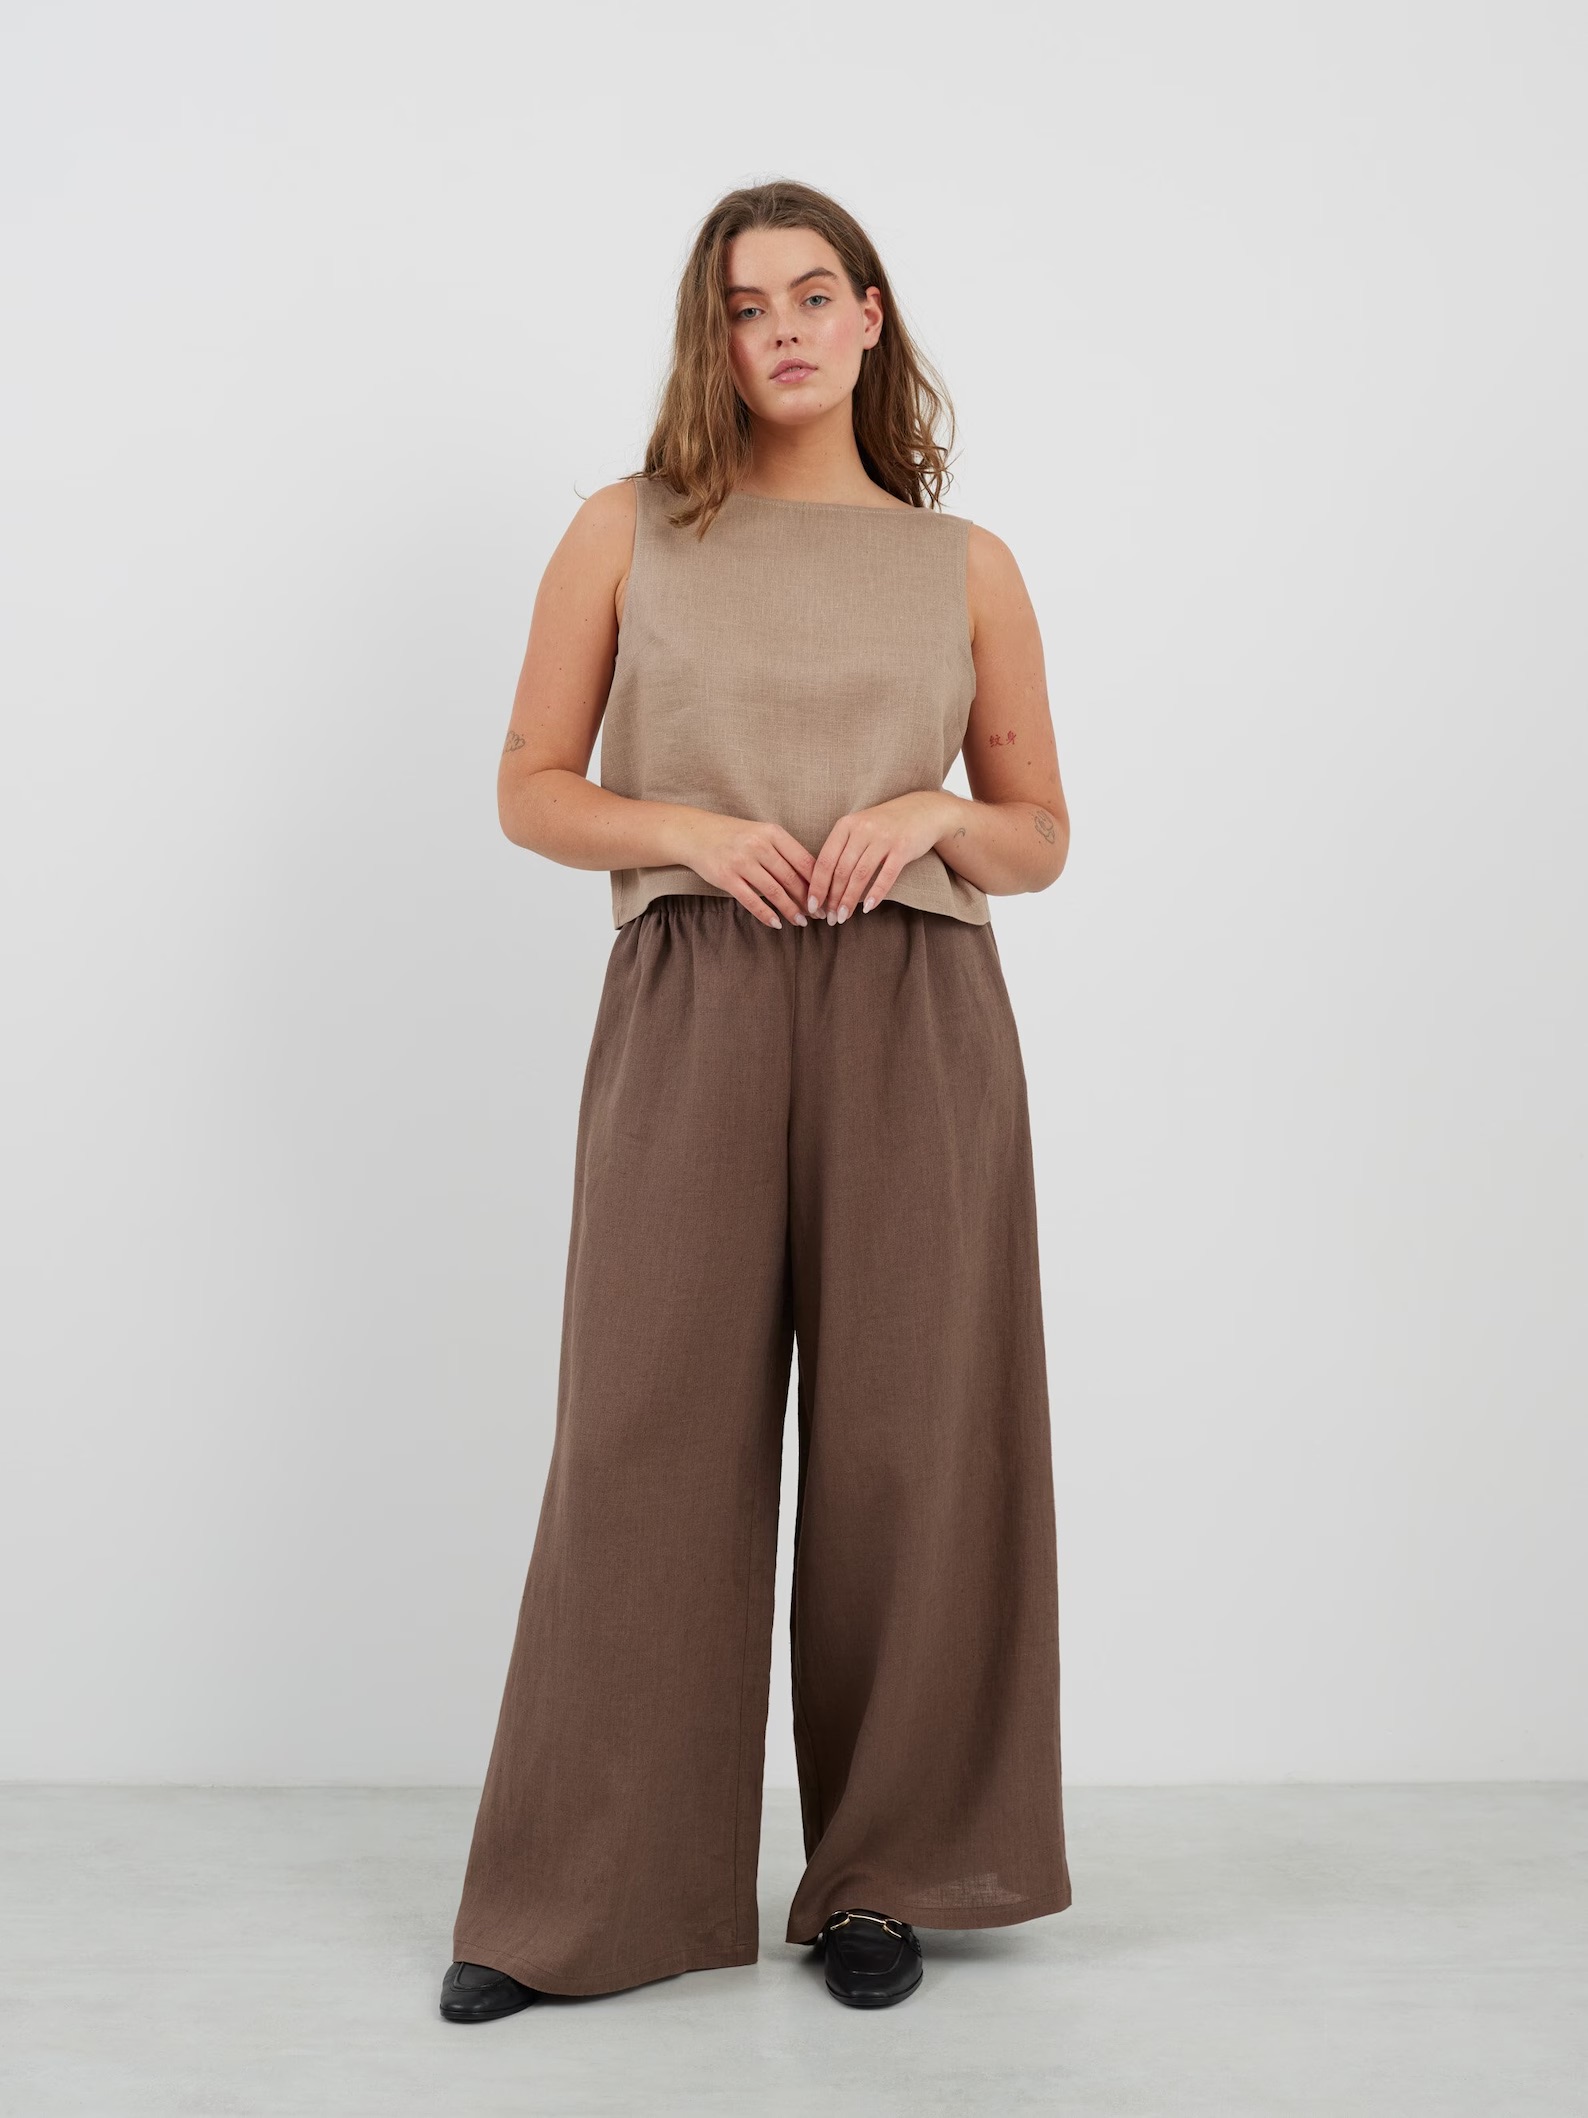 A model wearing a two-tone linen tank and wide leg pants set from Love & Confuse. 